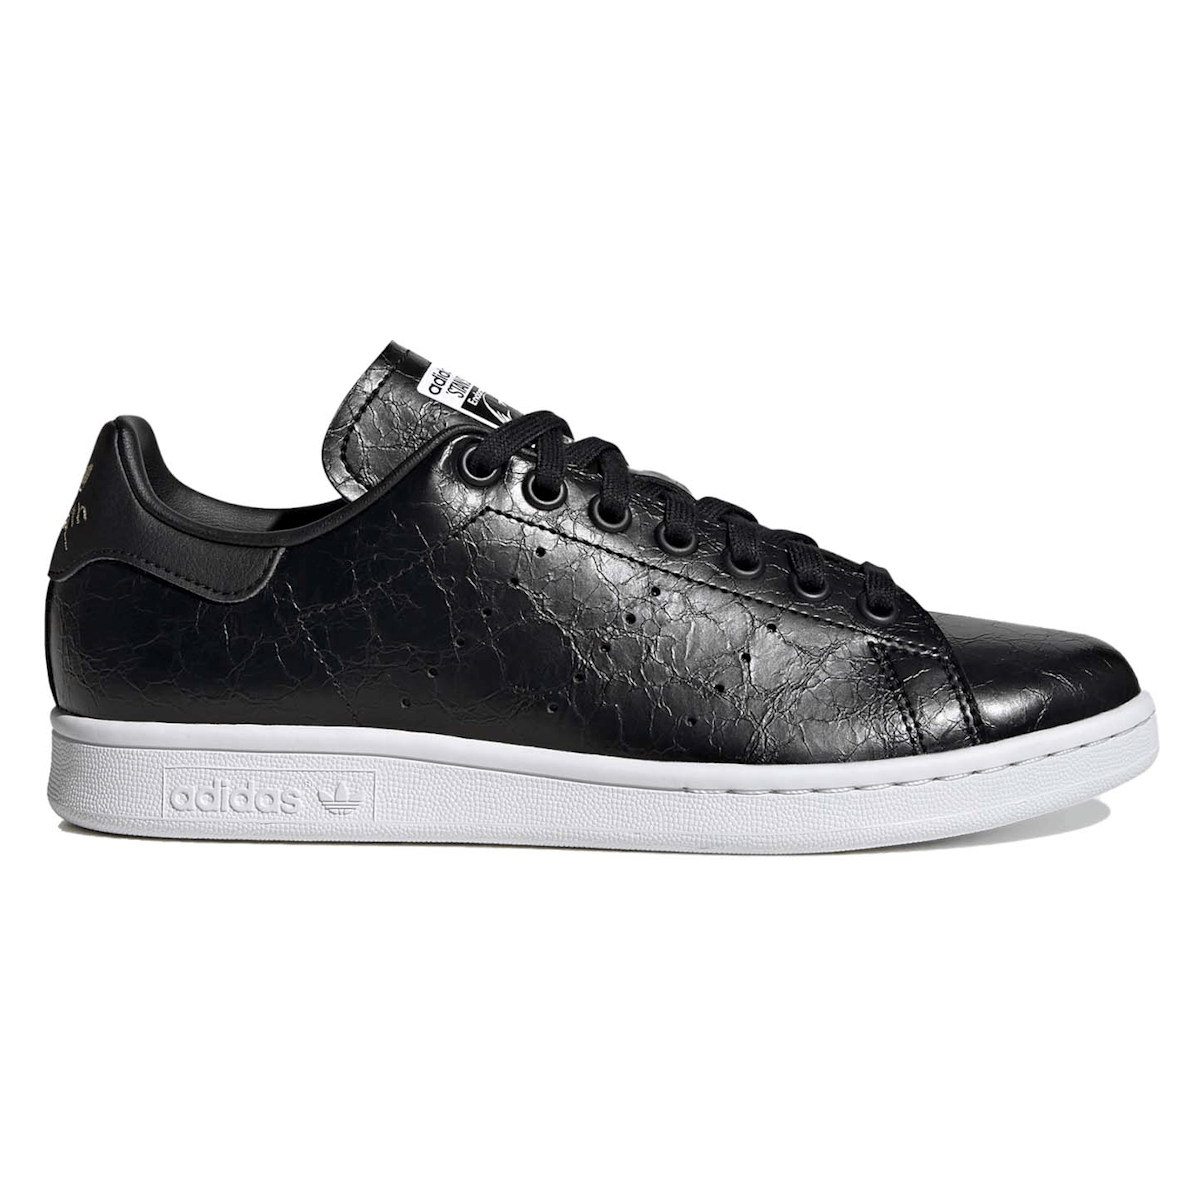 adidas Stan Smith Cracked Leather Black Gold (W)